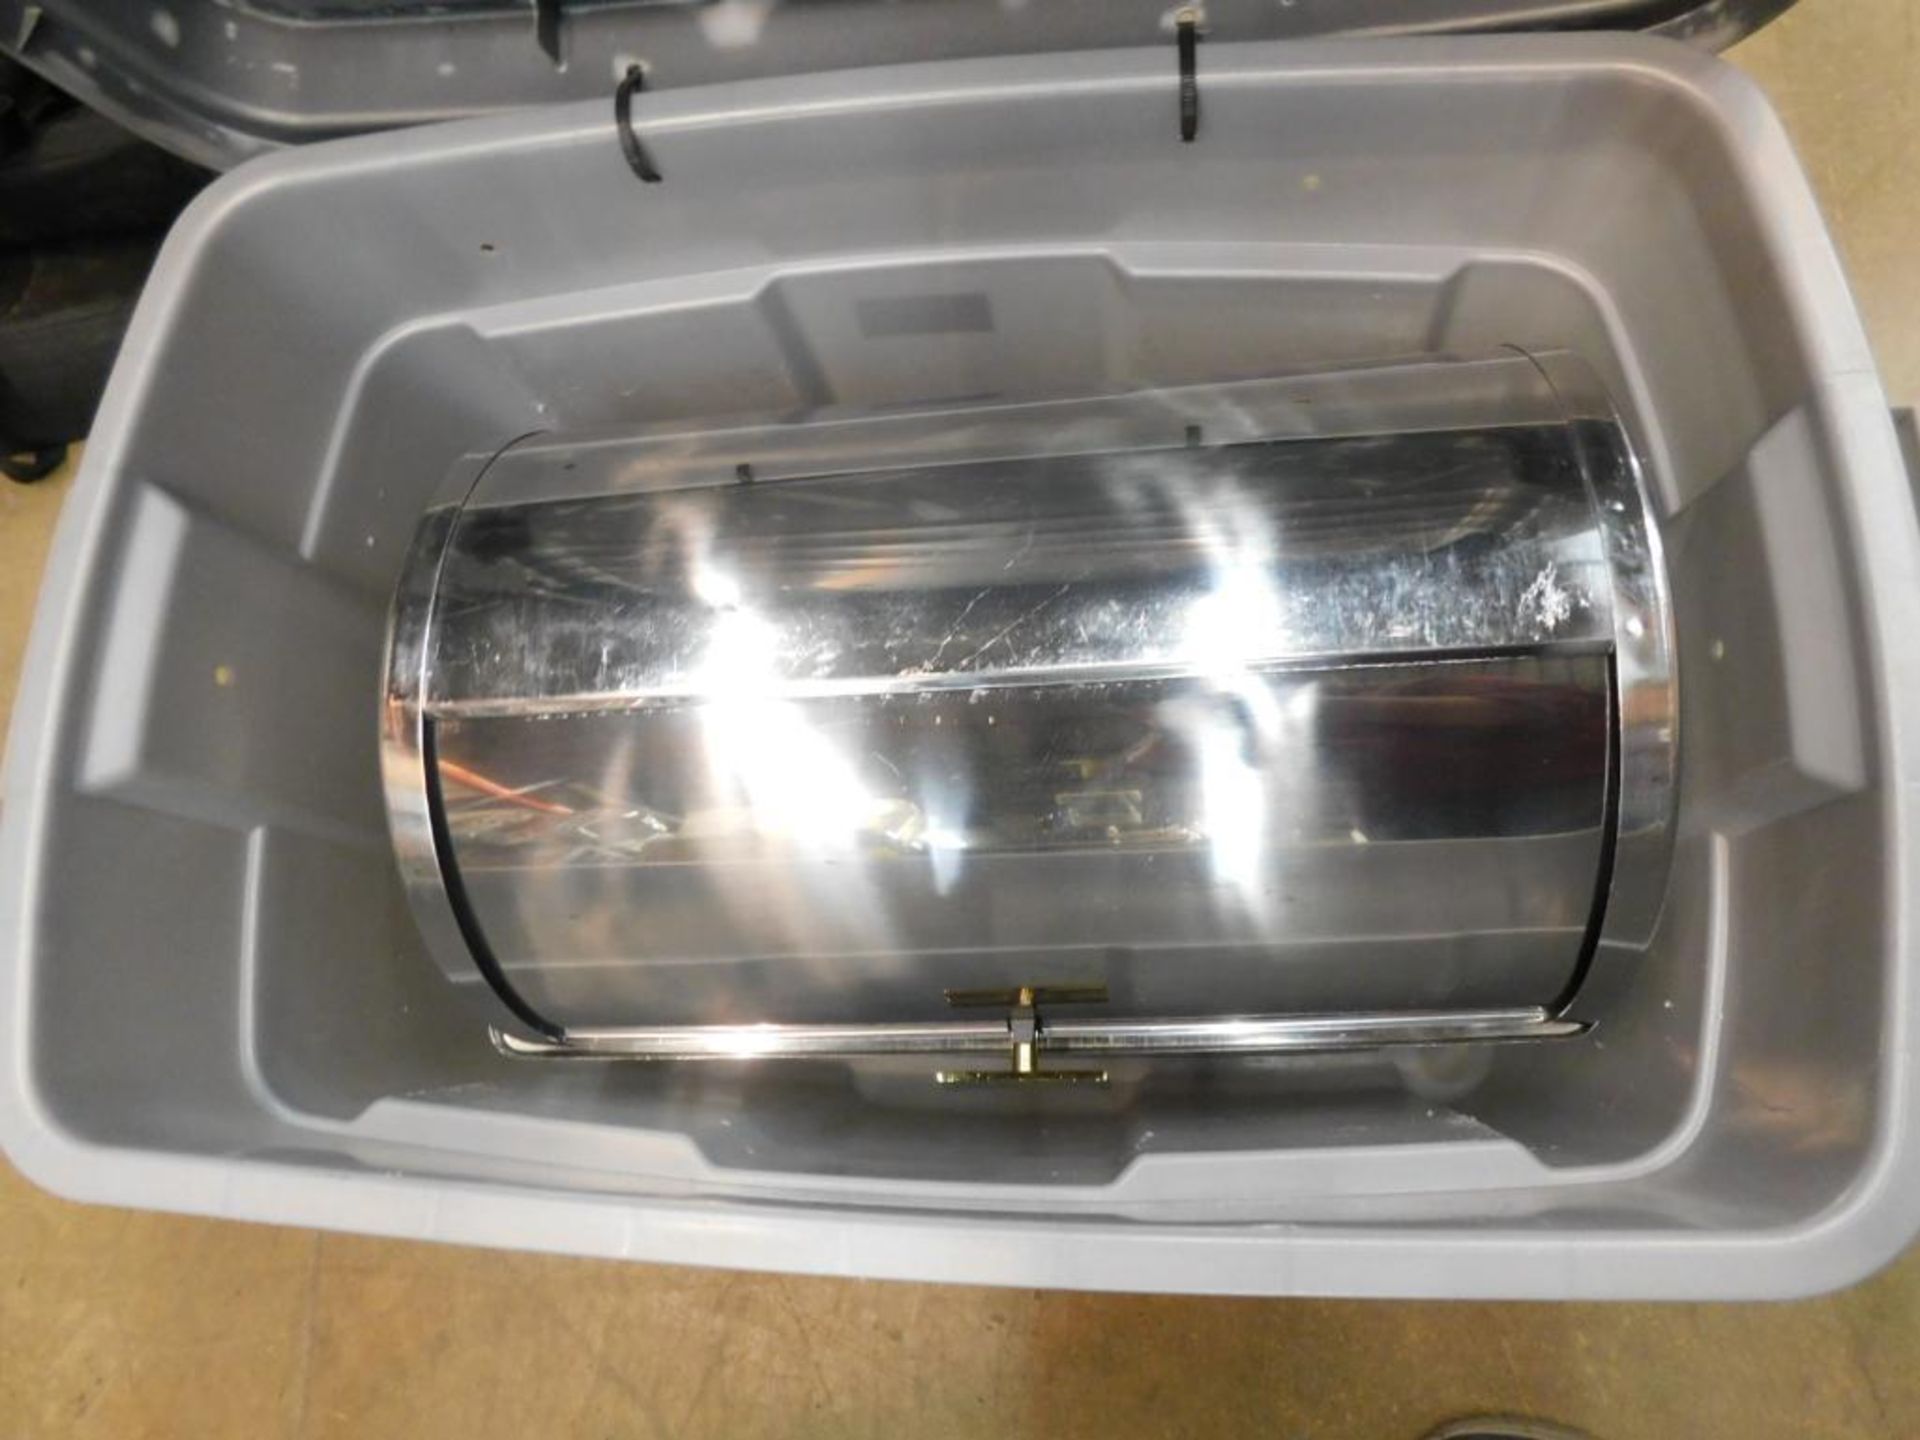 12” x 20" Roll Top Chafer Dish (LOCATION: 1766 Waukegan Rd., Glenview, IL 60025)